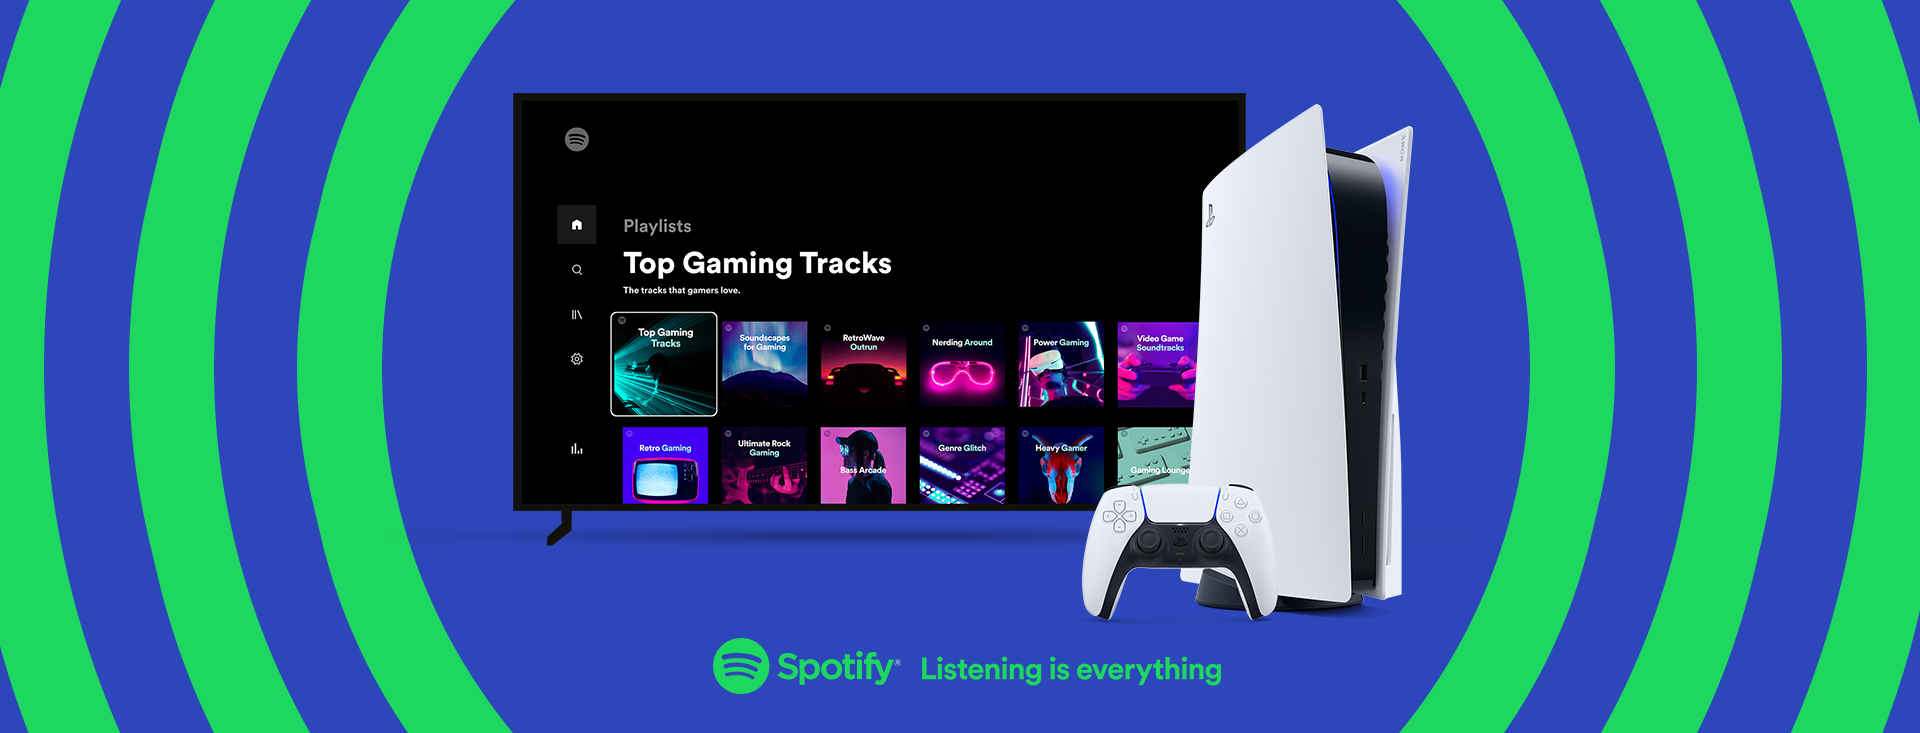 Spotify detail all the new ways to stream music from your PlayStation 5